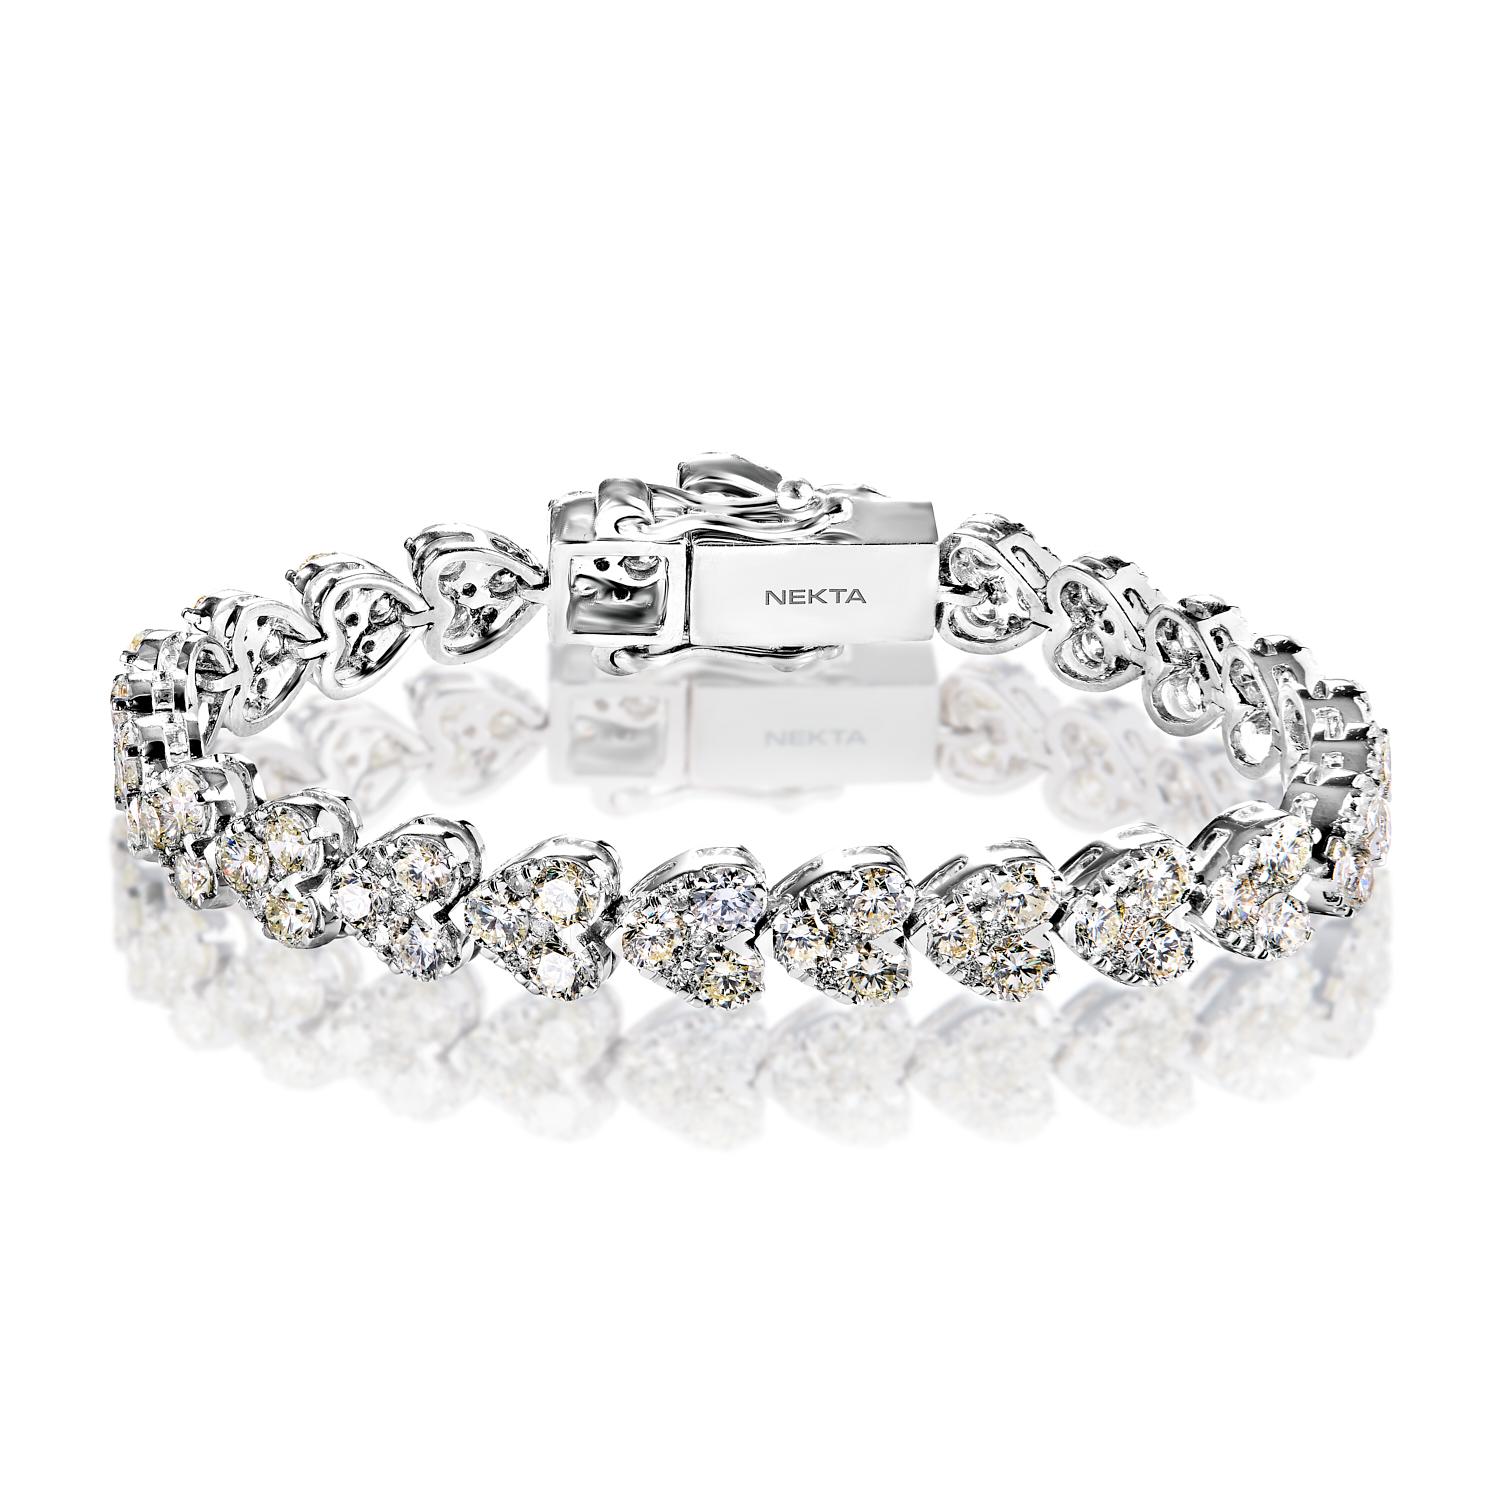 The AVAH 15 Carat Single Row Diamond Bracelet features ROUND BRILLIANT CUT DIAMONDS brilliants weighing a total of approximately 15.38 carats, set in 14K White Gold.


Style:
Diamonds
Diamond Size: 15.38 Carats
Diamond Shape: Round Brilliant